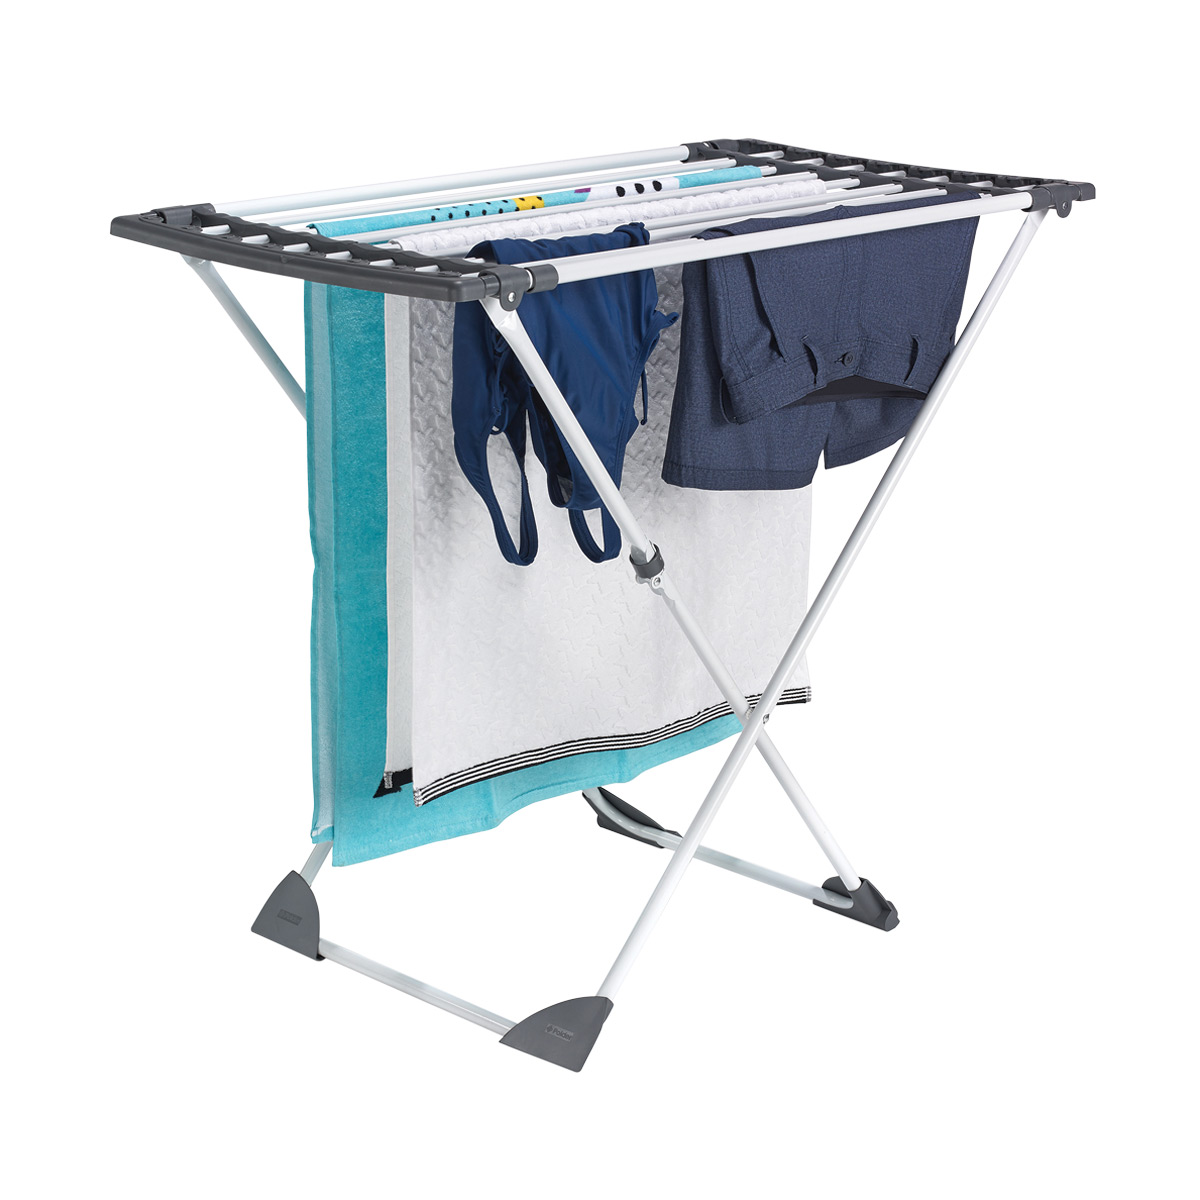 https://www.containerstore.com/catalogimages/369295/10078795-Polder-Expand-Drying-Rack-V.jpg